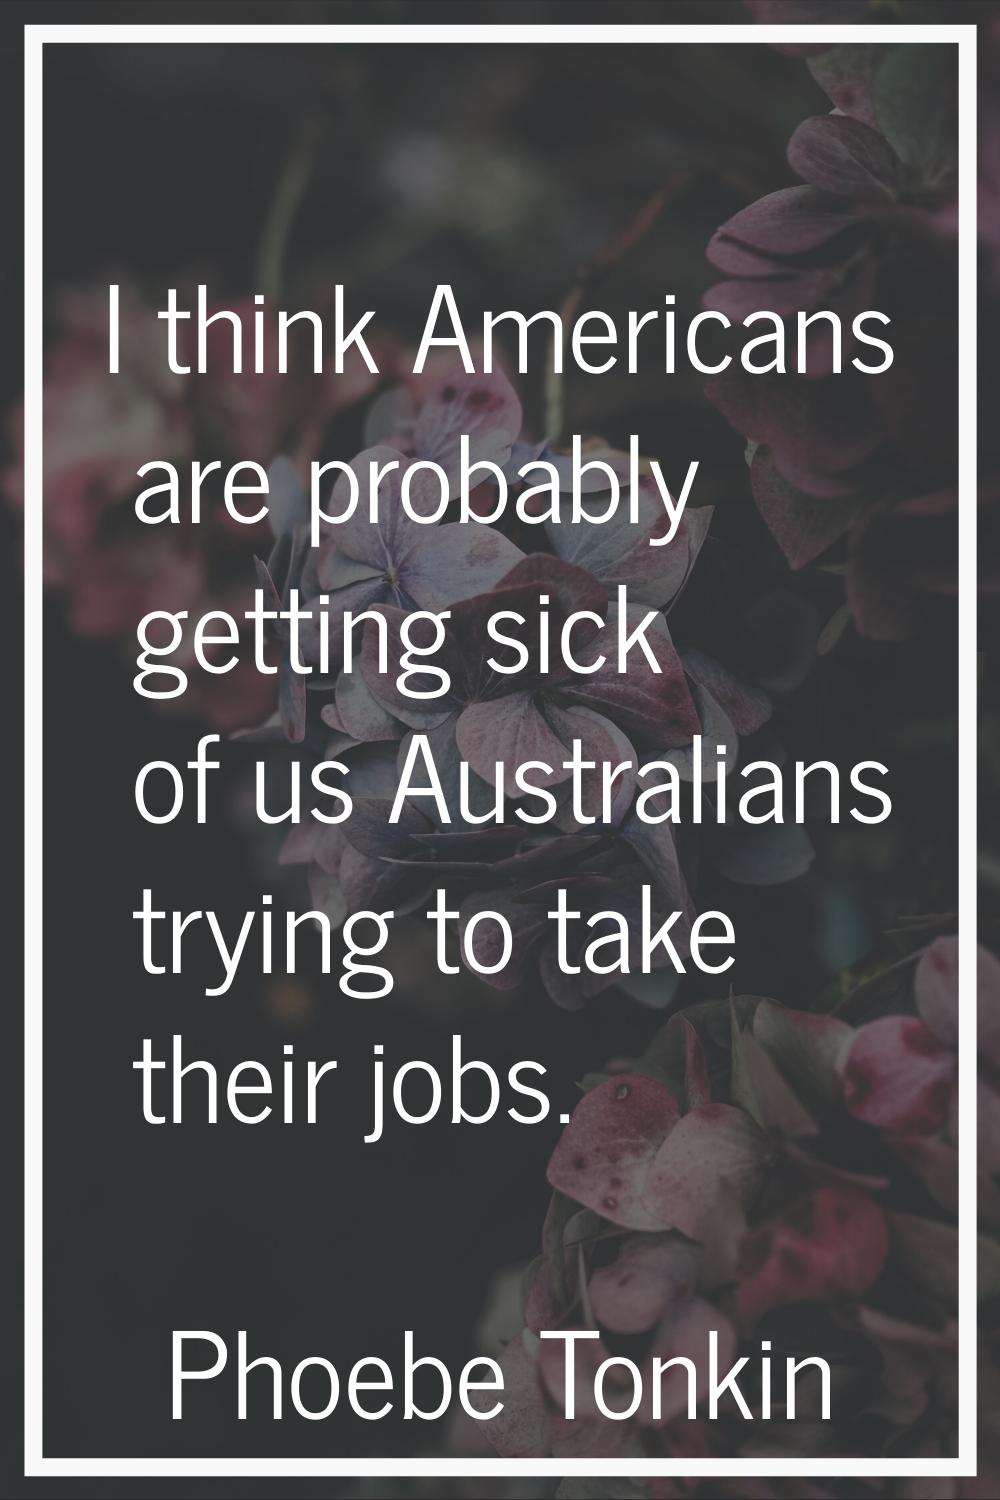 I think Americans are probably getting sick of us Australians trying to take their jobs.